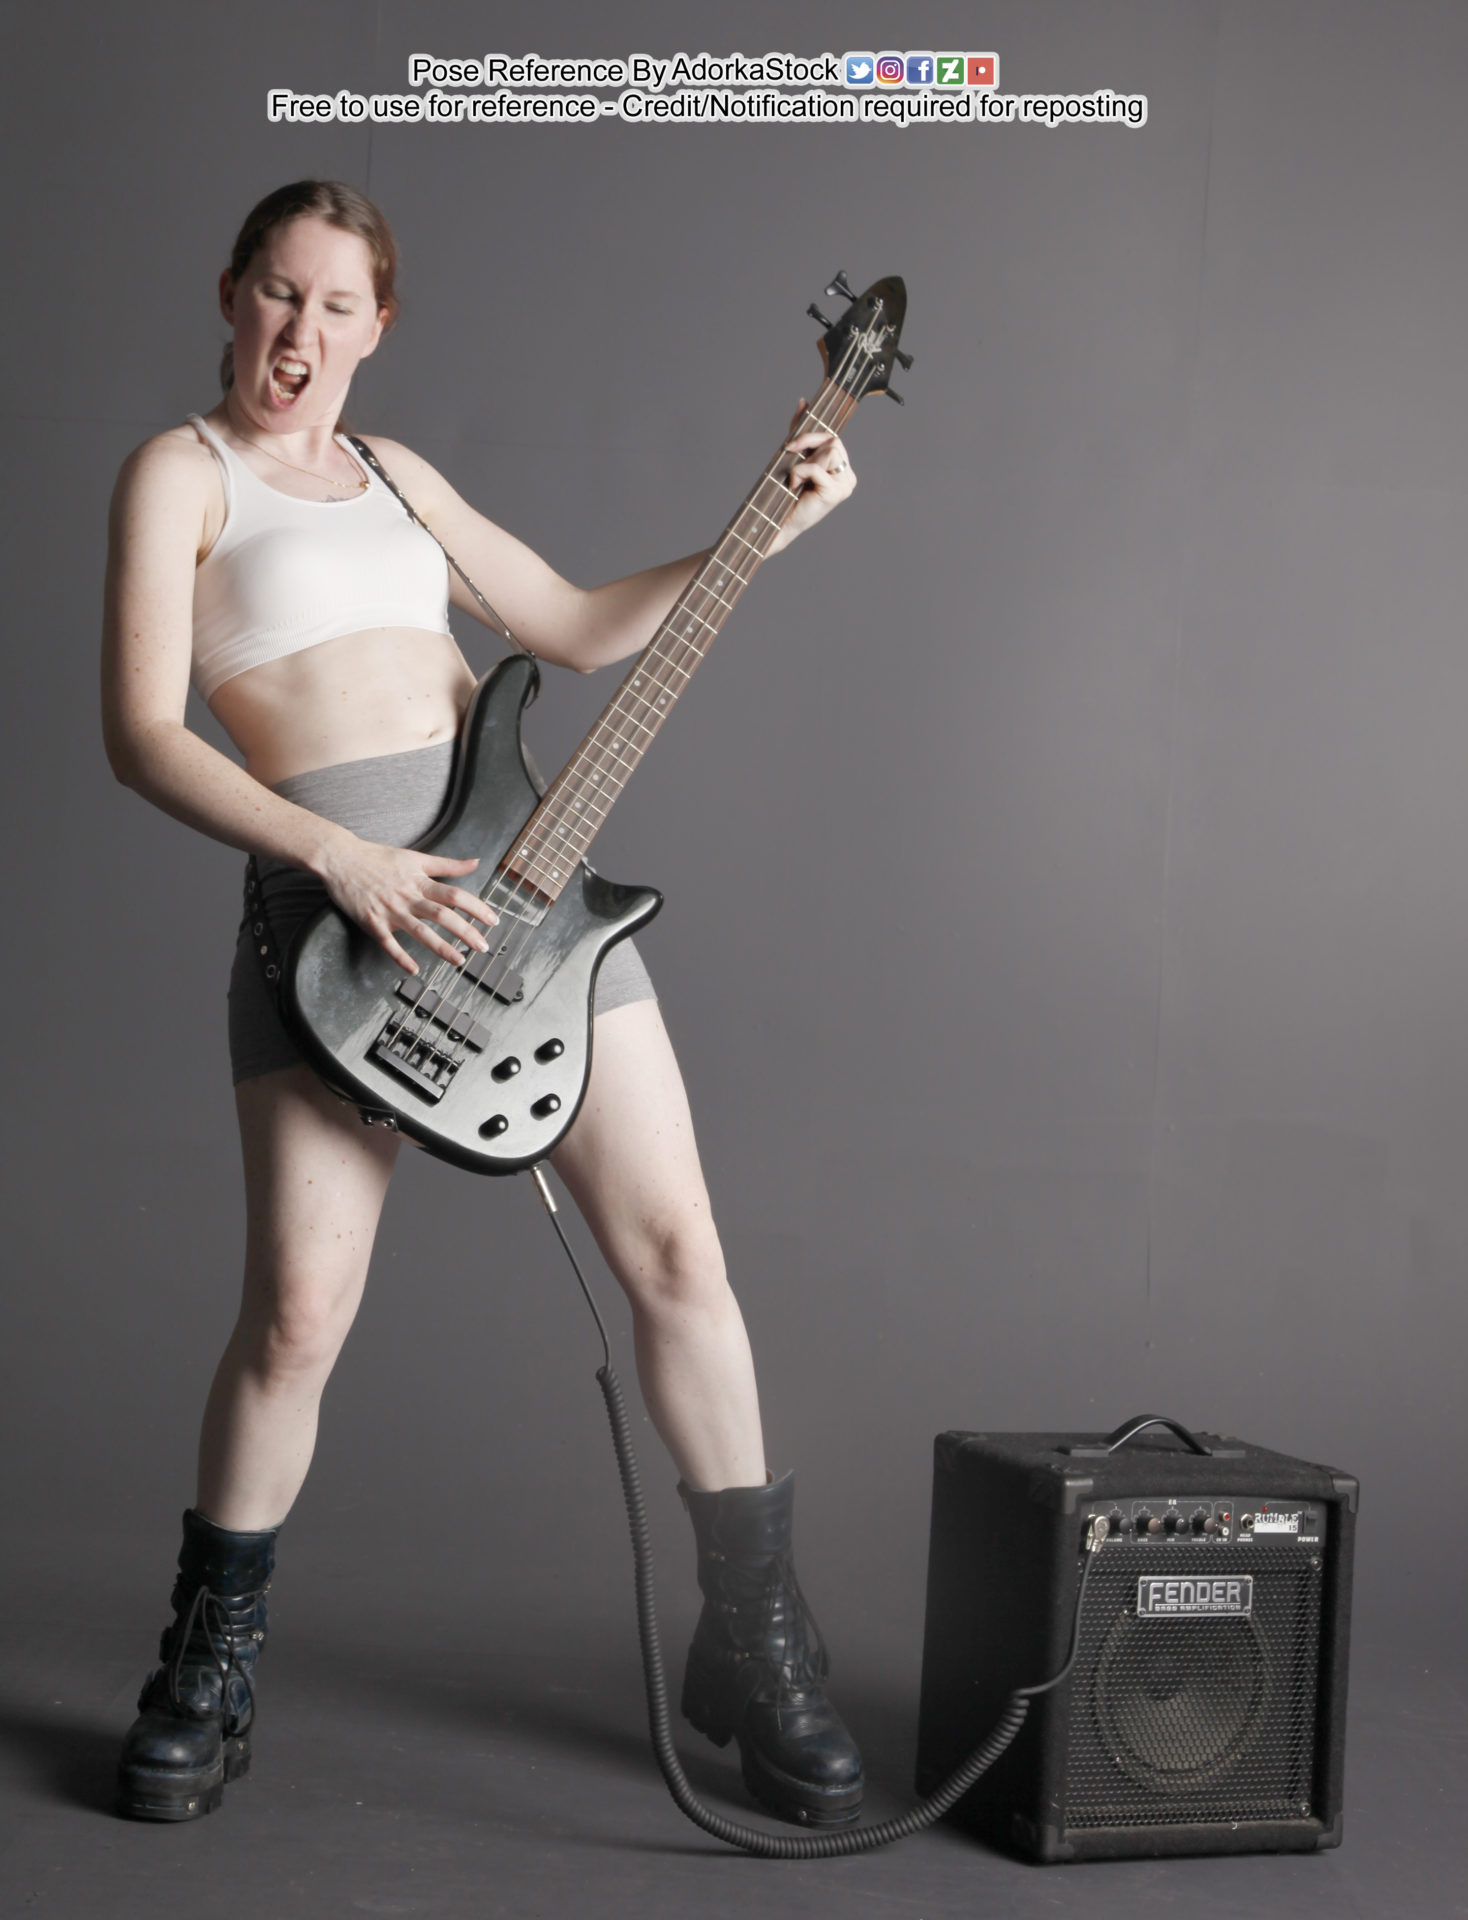 A woman in a white sports bra, grey shorts and black combat boots playing a black Fender guitar hooked up to a black Fender amp with a curly cord. Her mouth is open and her eyes closed as if in mid song